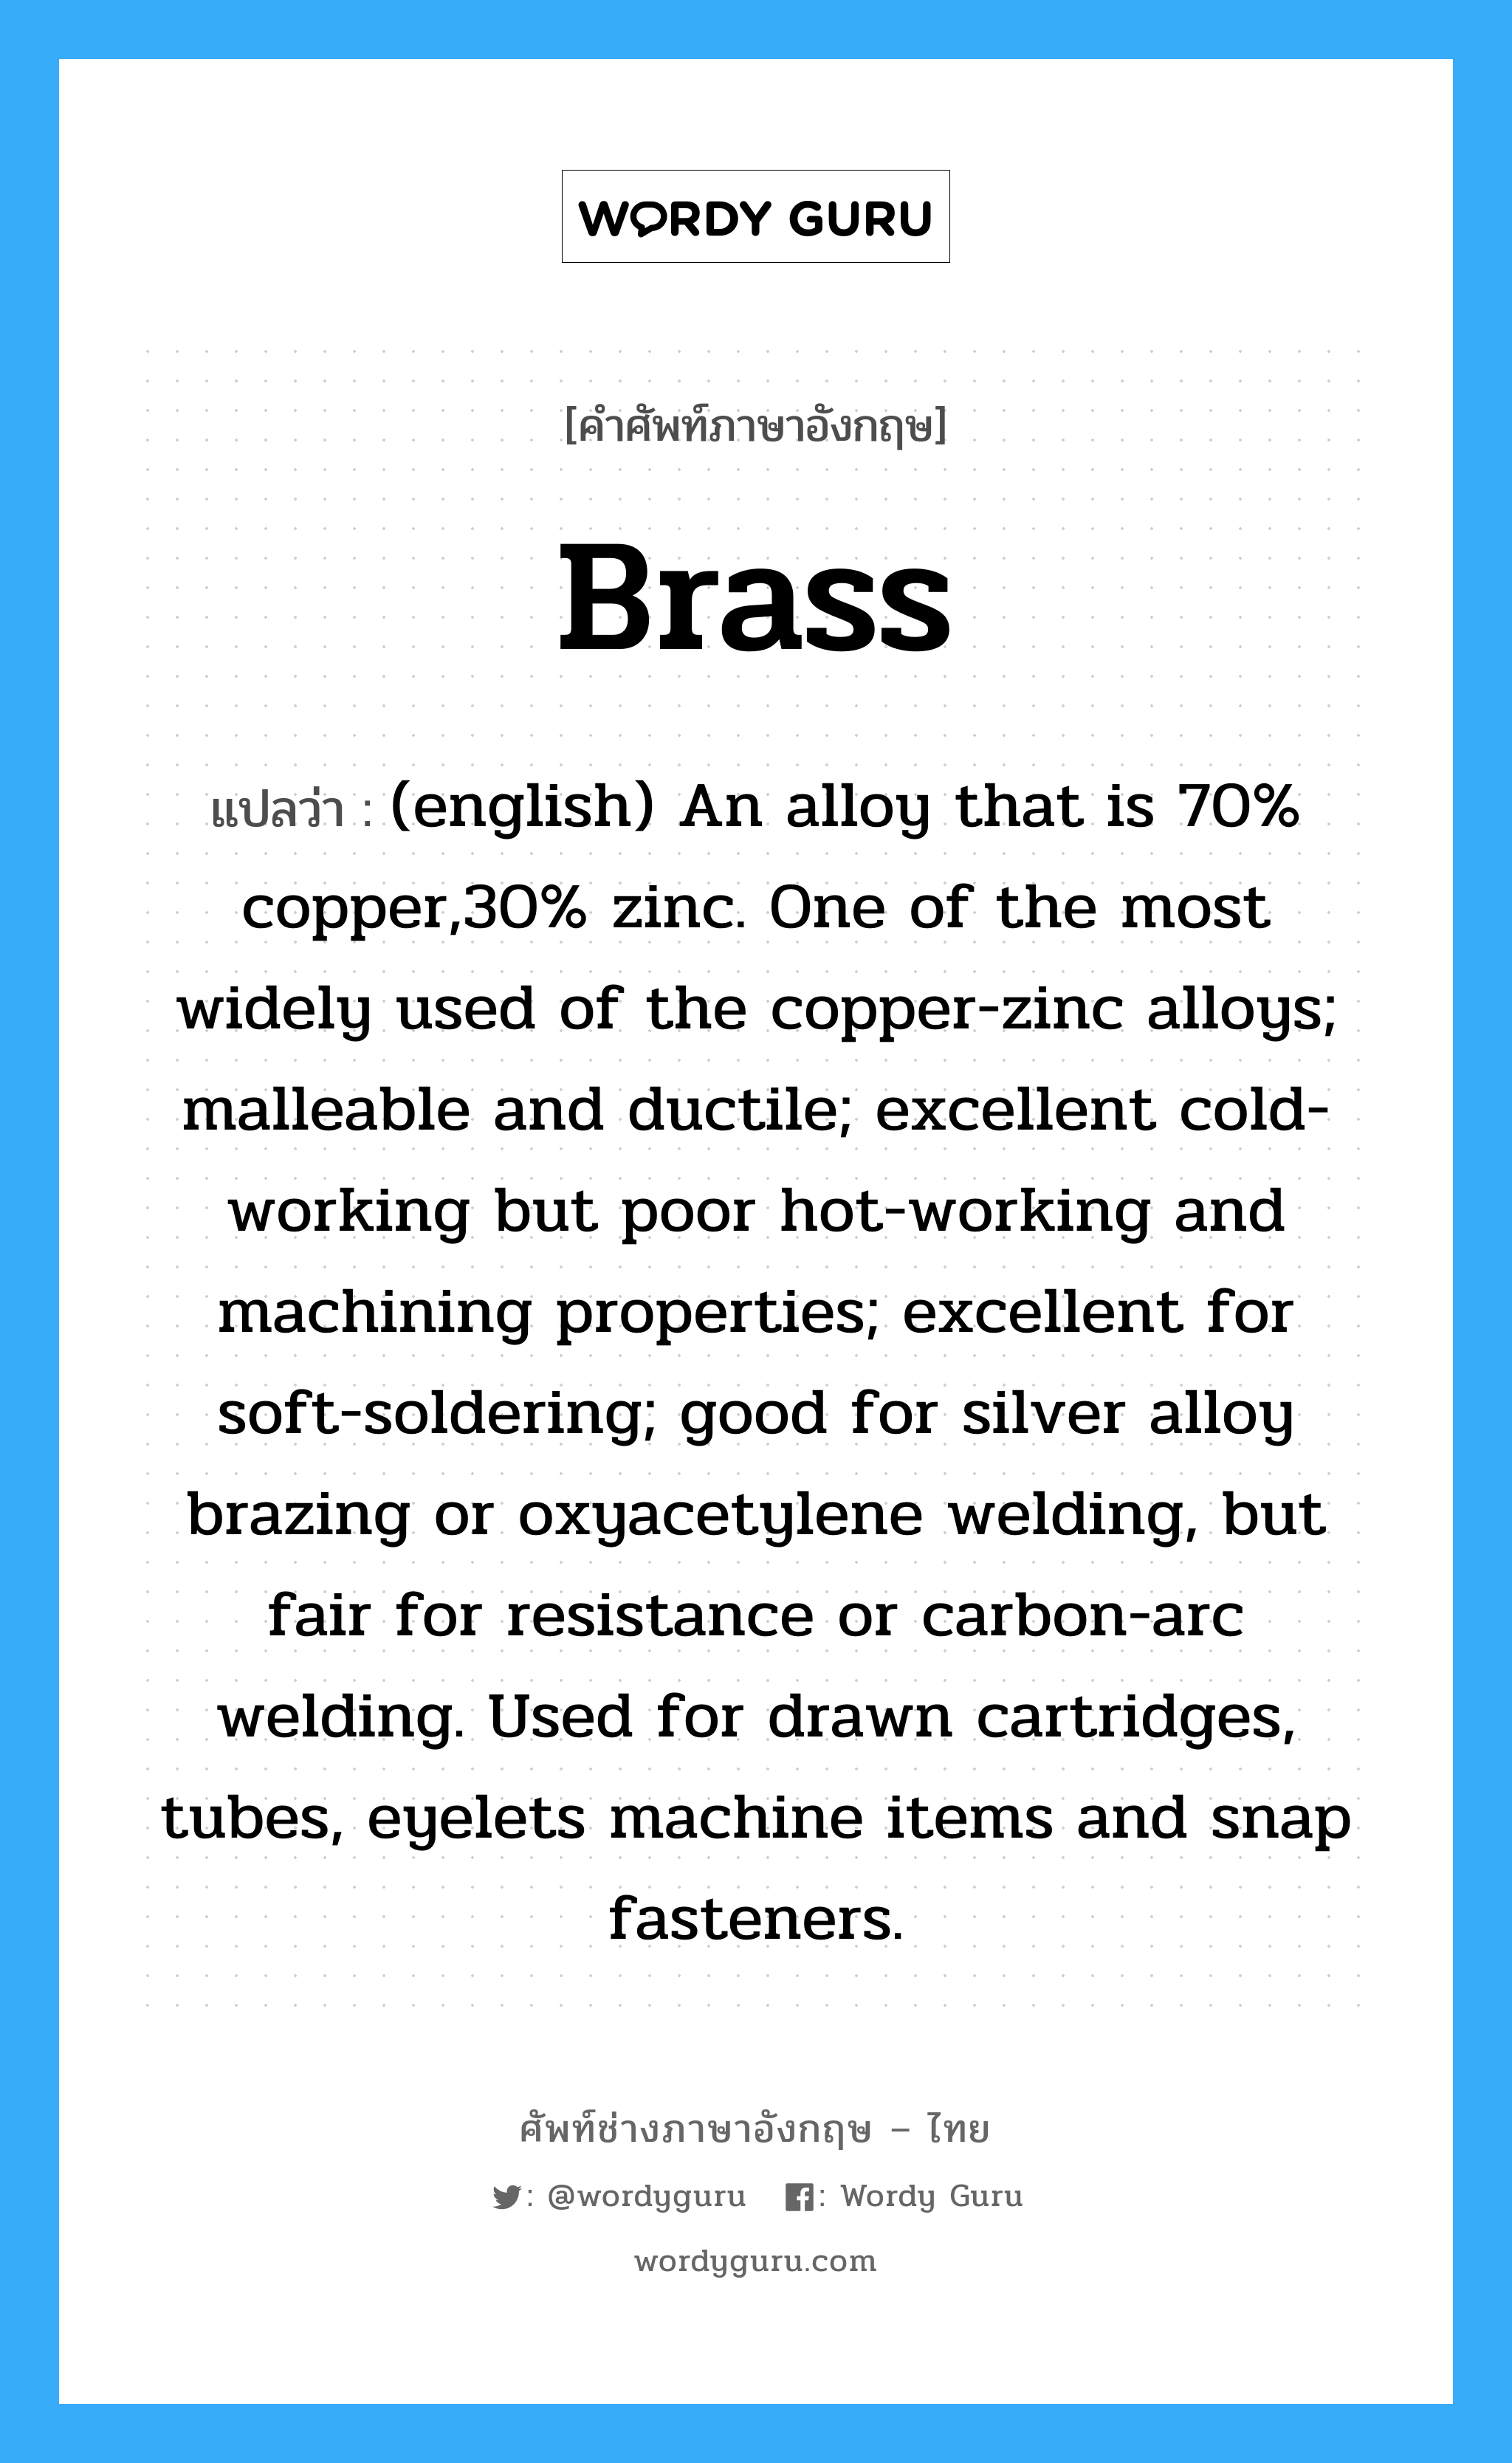 Brass แปลว่า?, คำศัพท์ช่างภาษาอังกฤษ - ไทย Brass คำศัพท์ภาษาอังกฤษ Brass แปลว่า (english) An alloy that is 70% copper,30% zinc. One of the most widely used of the copper-zinc alloys; malleable and ductile; excellent cold-working but poor hot-working and machining properties; excellent for soft-soldering; good for silver alloy brazing or oxyacetylene welding, but fair for resistance or carbon-arc welding. Used for drawn cartridges, tubes, eyelets machine items and snap fasteners.